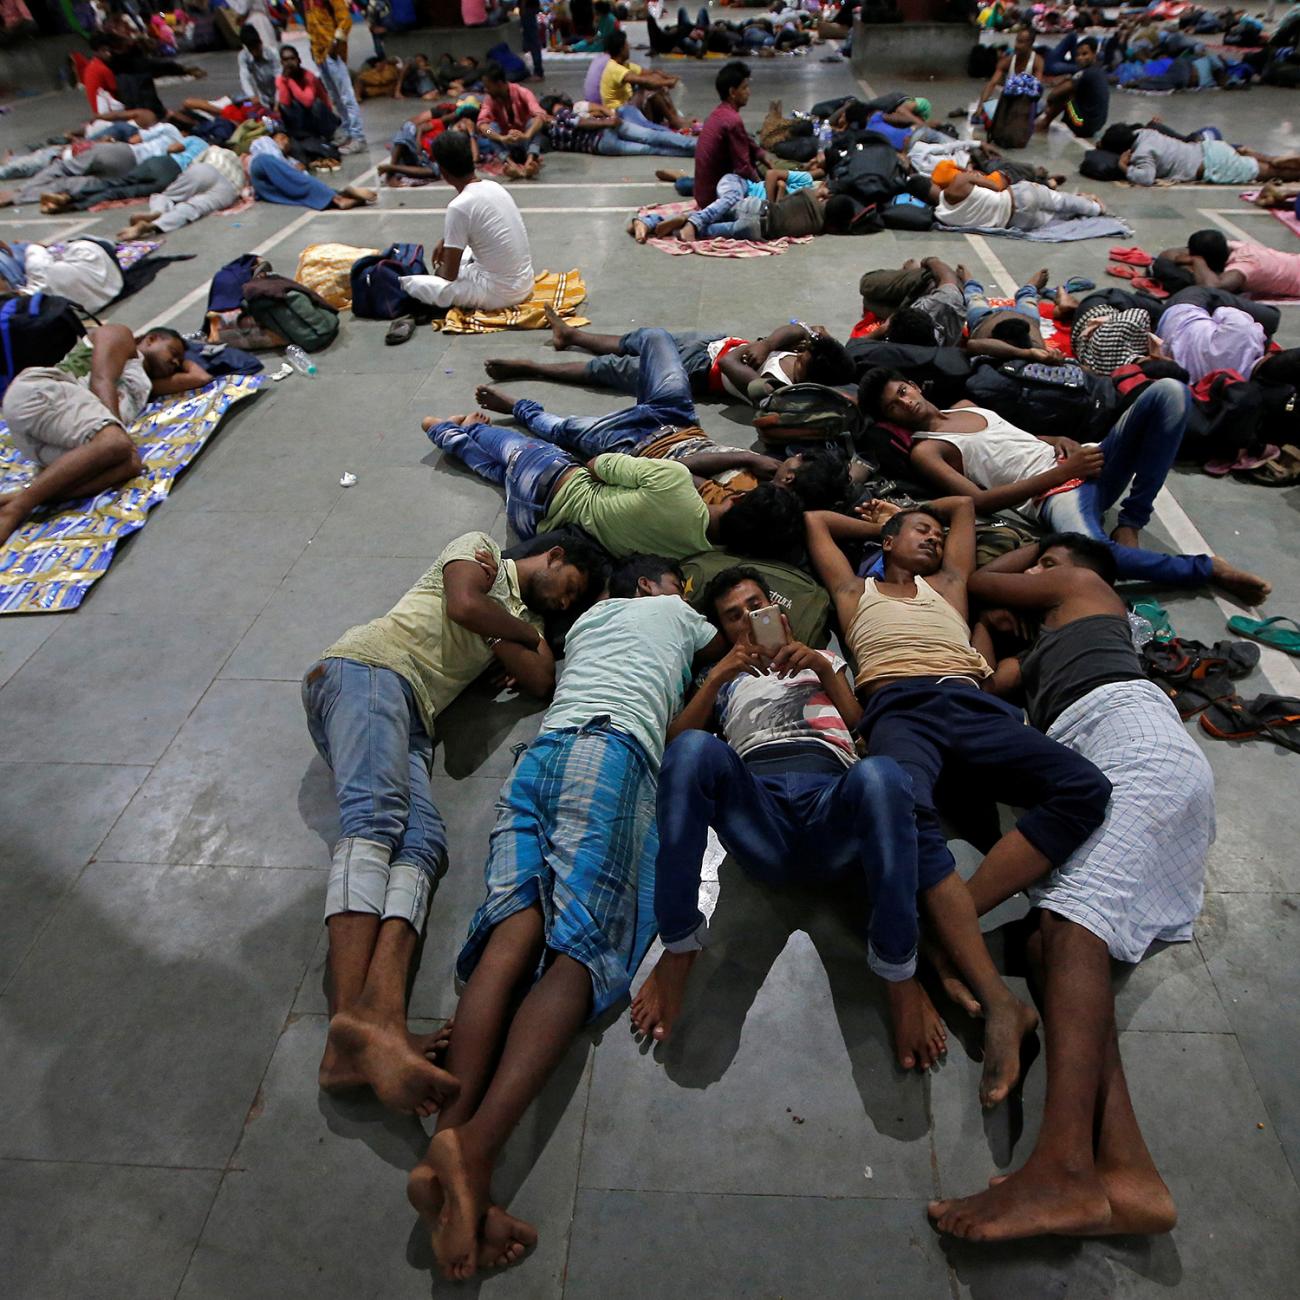 The photo shows a large number of people stretched out on concrete resting. 